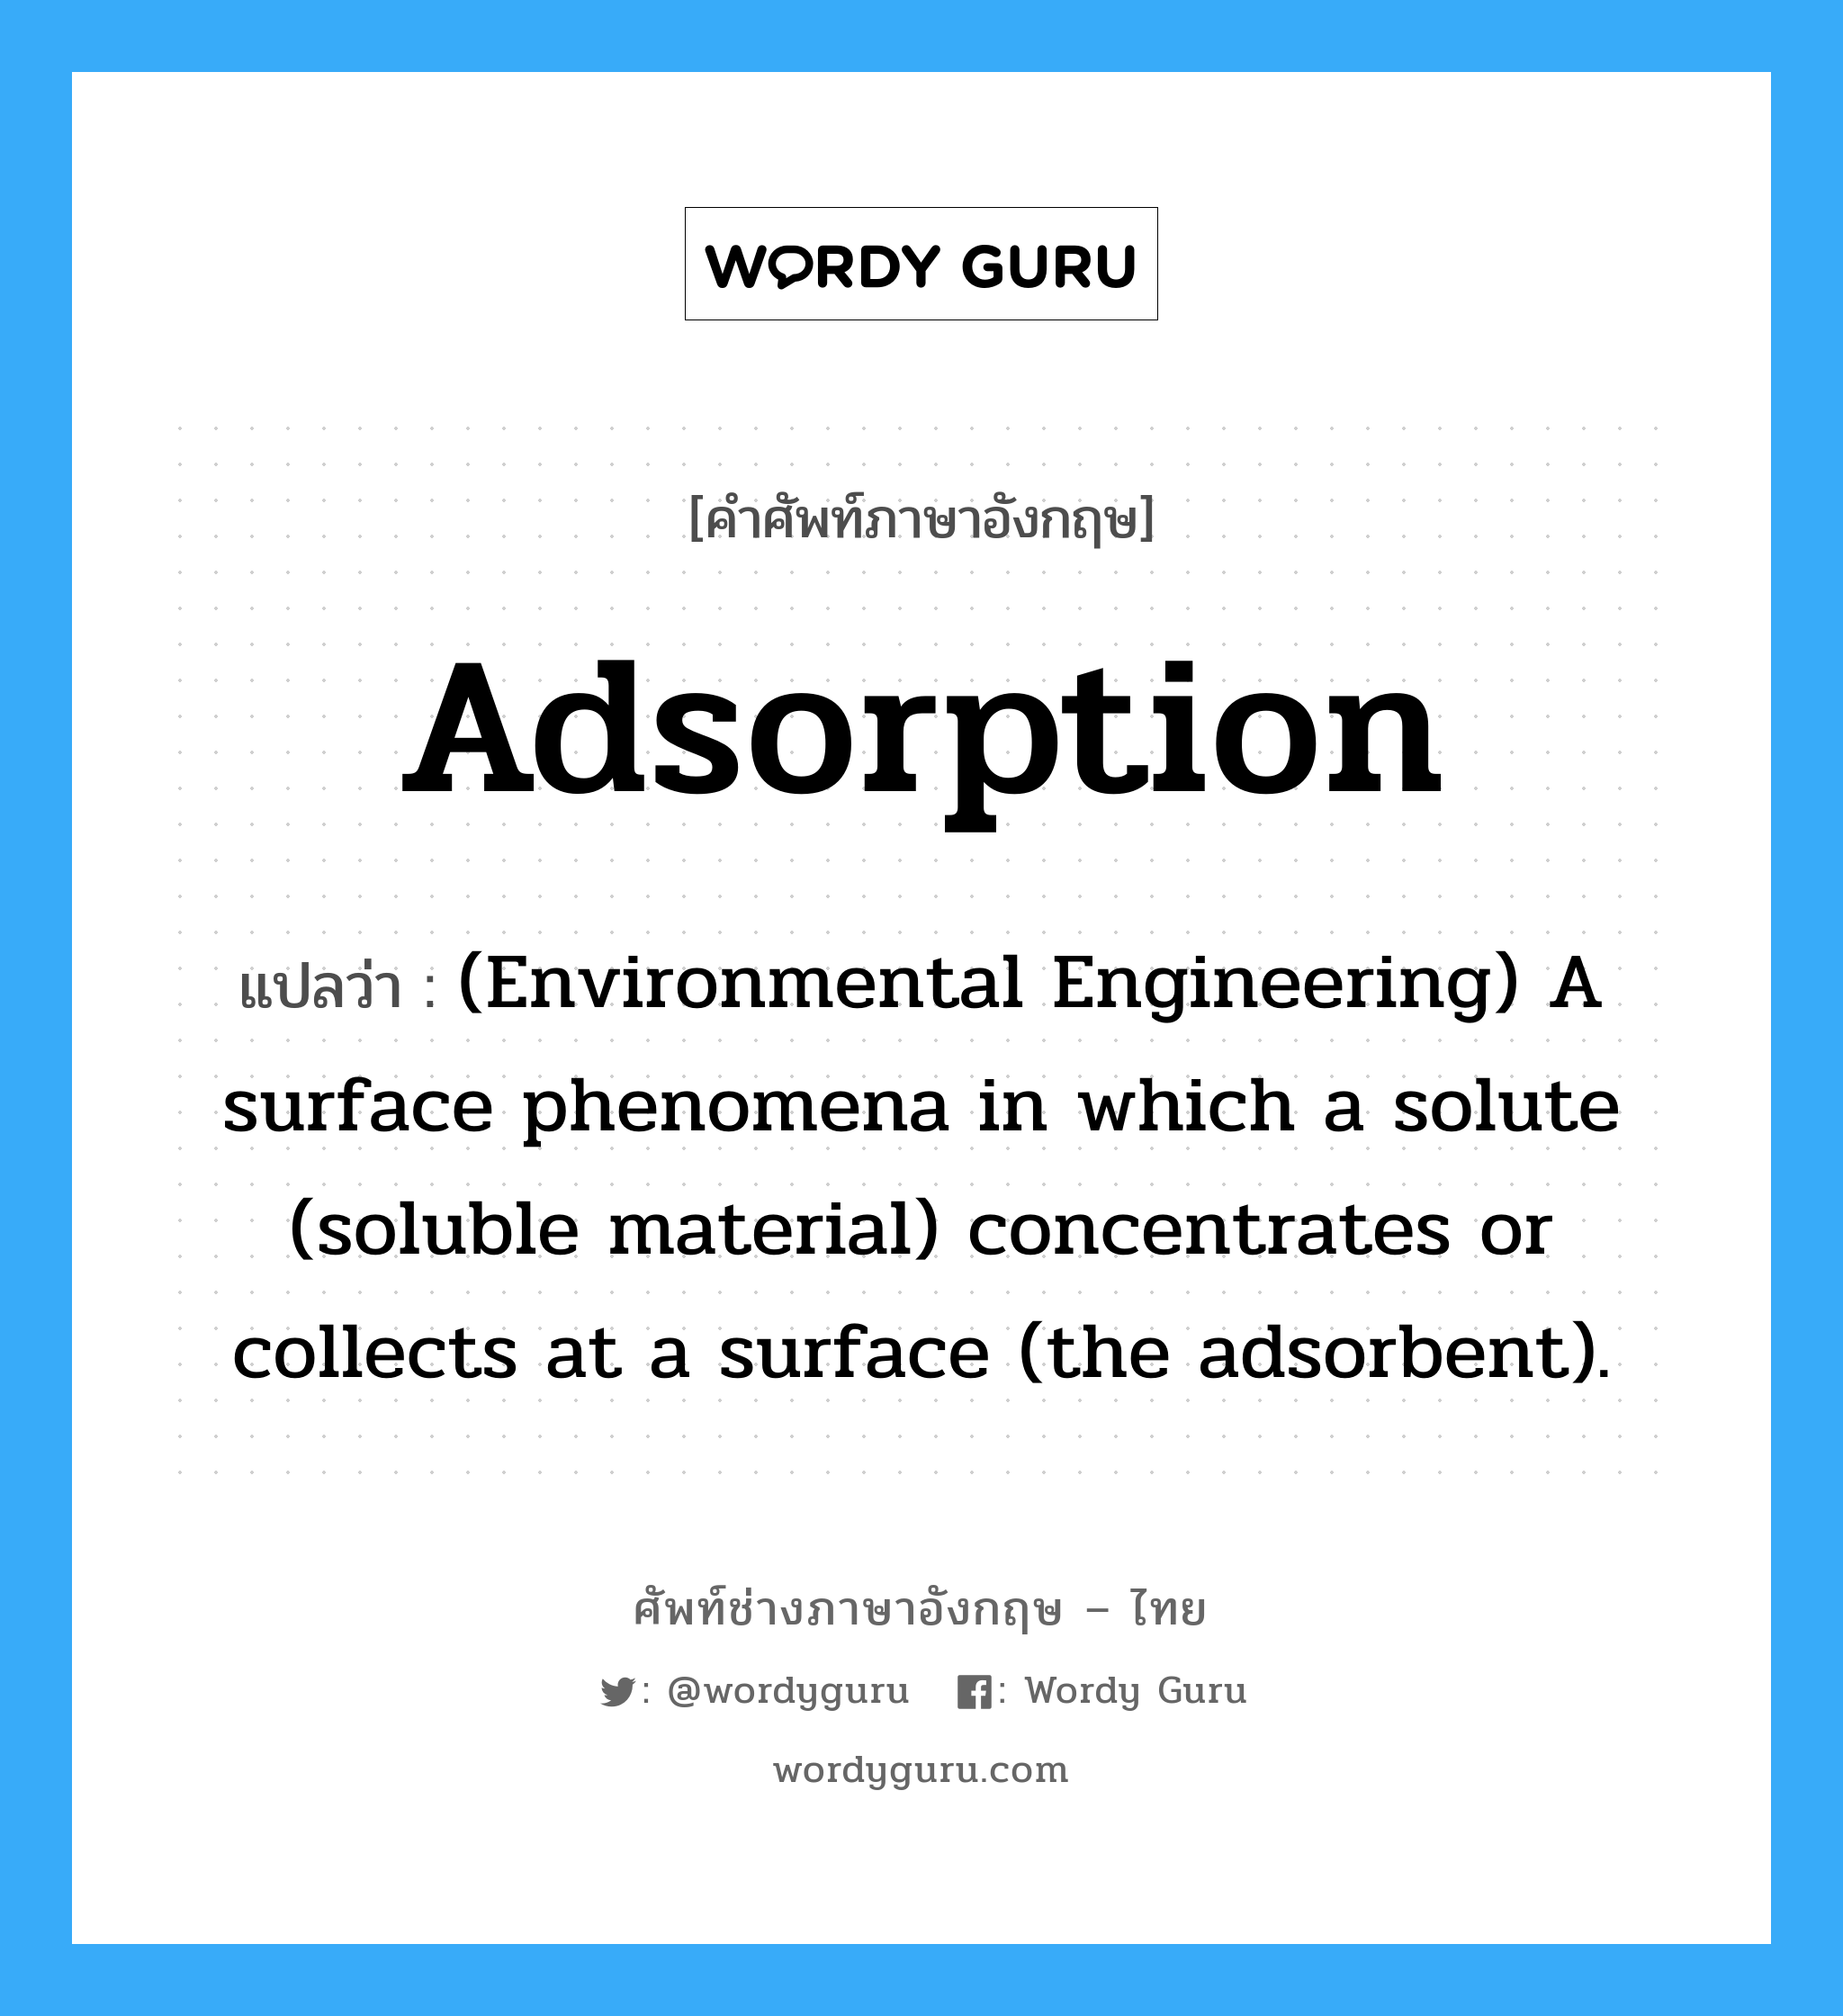 Adsorption แปลว่า?, คำศัพท์ช่างภาษาอังกฤษ - ไทย Adsorption คำศัพท์ภาษาอังกฤษ Adsorption แปลว่า (Environmental Engineering) A surface phenomena in which a solute (soluble material) concentrates or collects at a surface (the adsorbent).